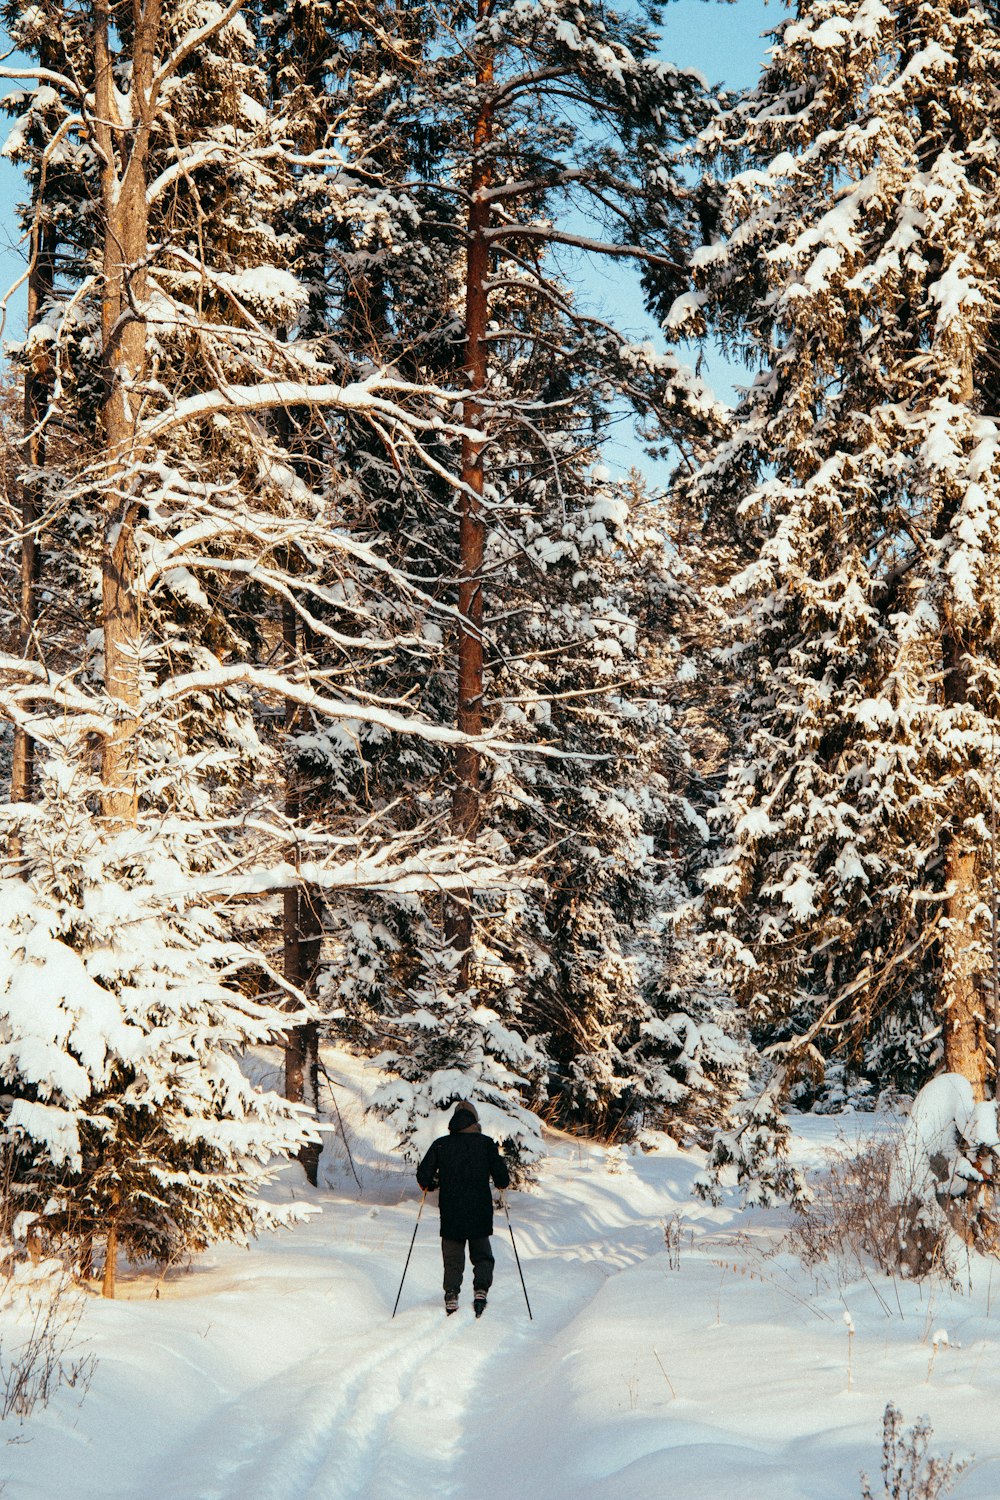 person in black jacket standing on snow covered ground near trees during daytime